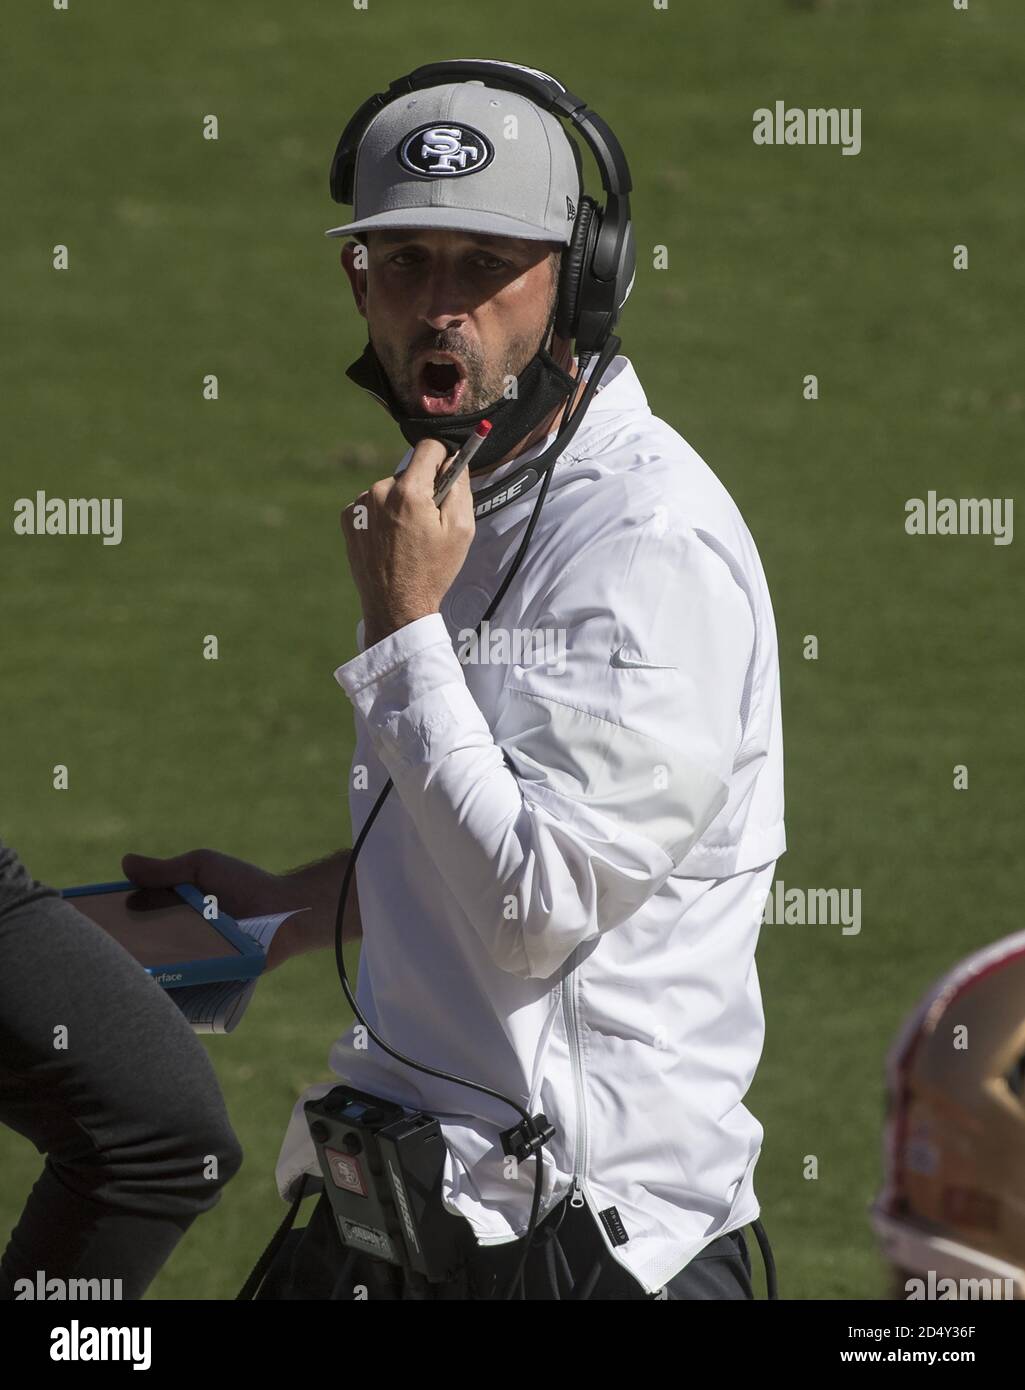 Santa Clara, United States. 11th Oct, 2020. San Francisco 49ers head coach Kyle Shanahan yells to his bench in the second quarter against the Miami Dolphins at Levi's Stadium in Santa Clara, California on Sunday, October 11, 2020. The Dolphins beat the 49ers 43-17. Photo by Terry Schmitt/UPI Credit: UPI/Alamy Live News Stock Photo